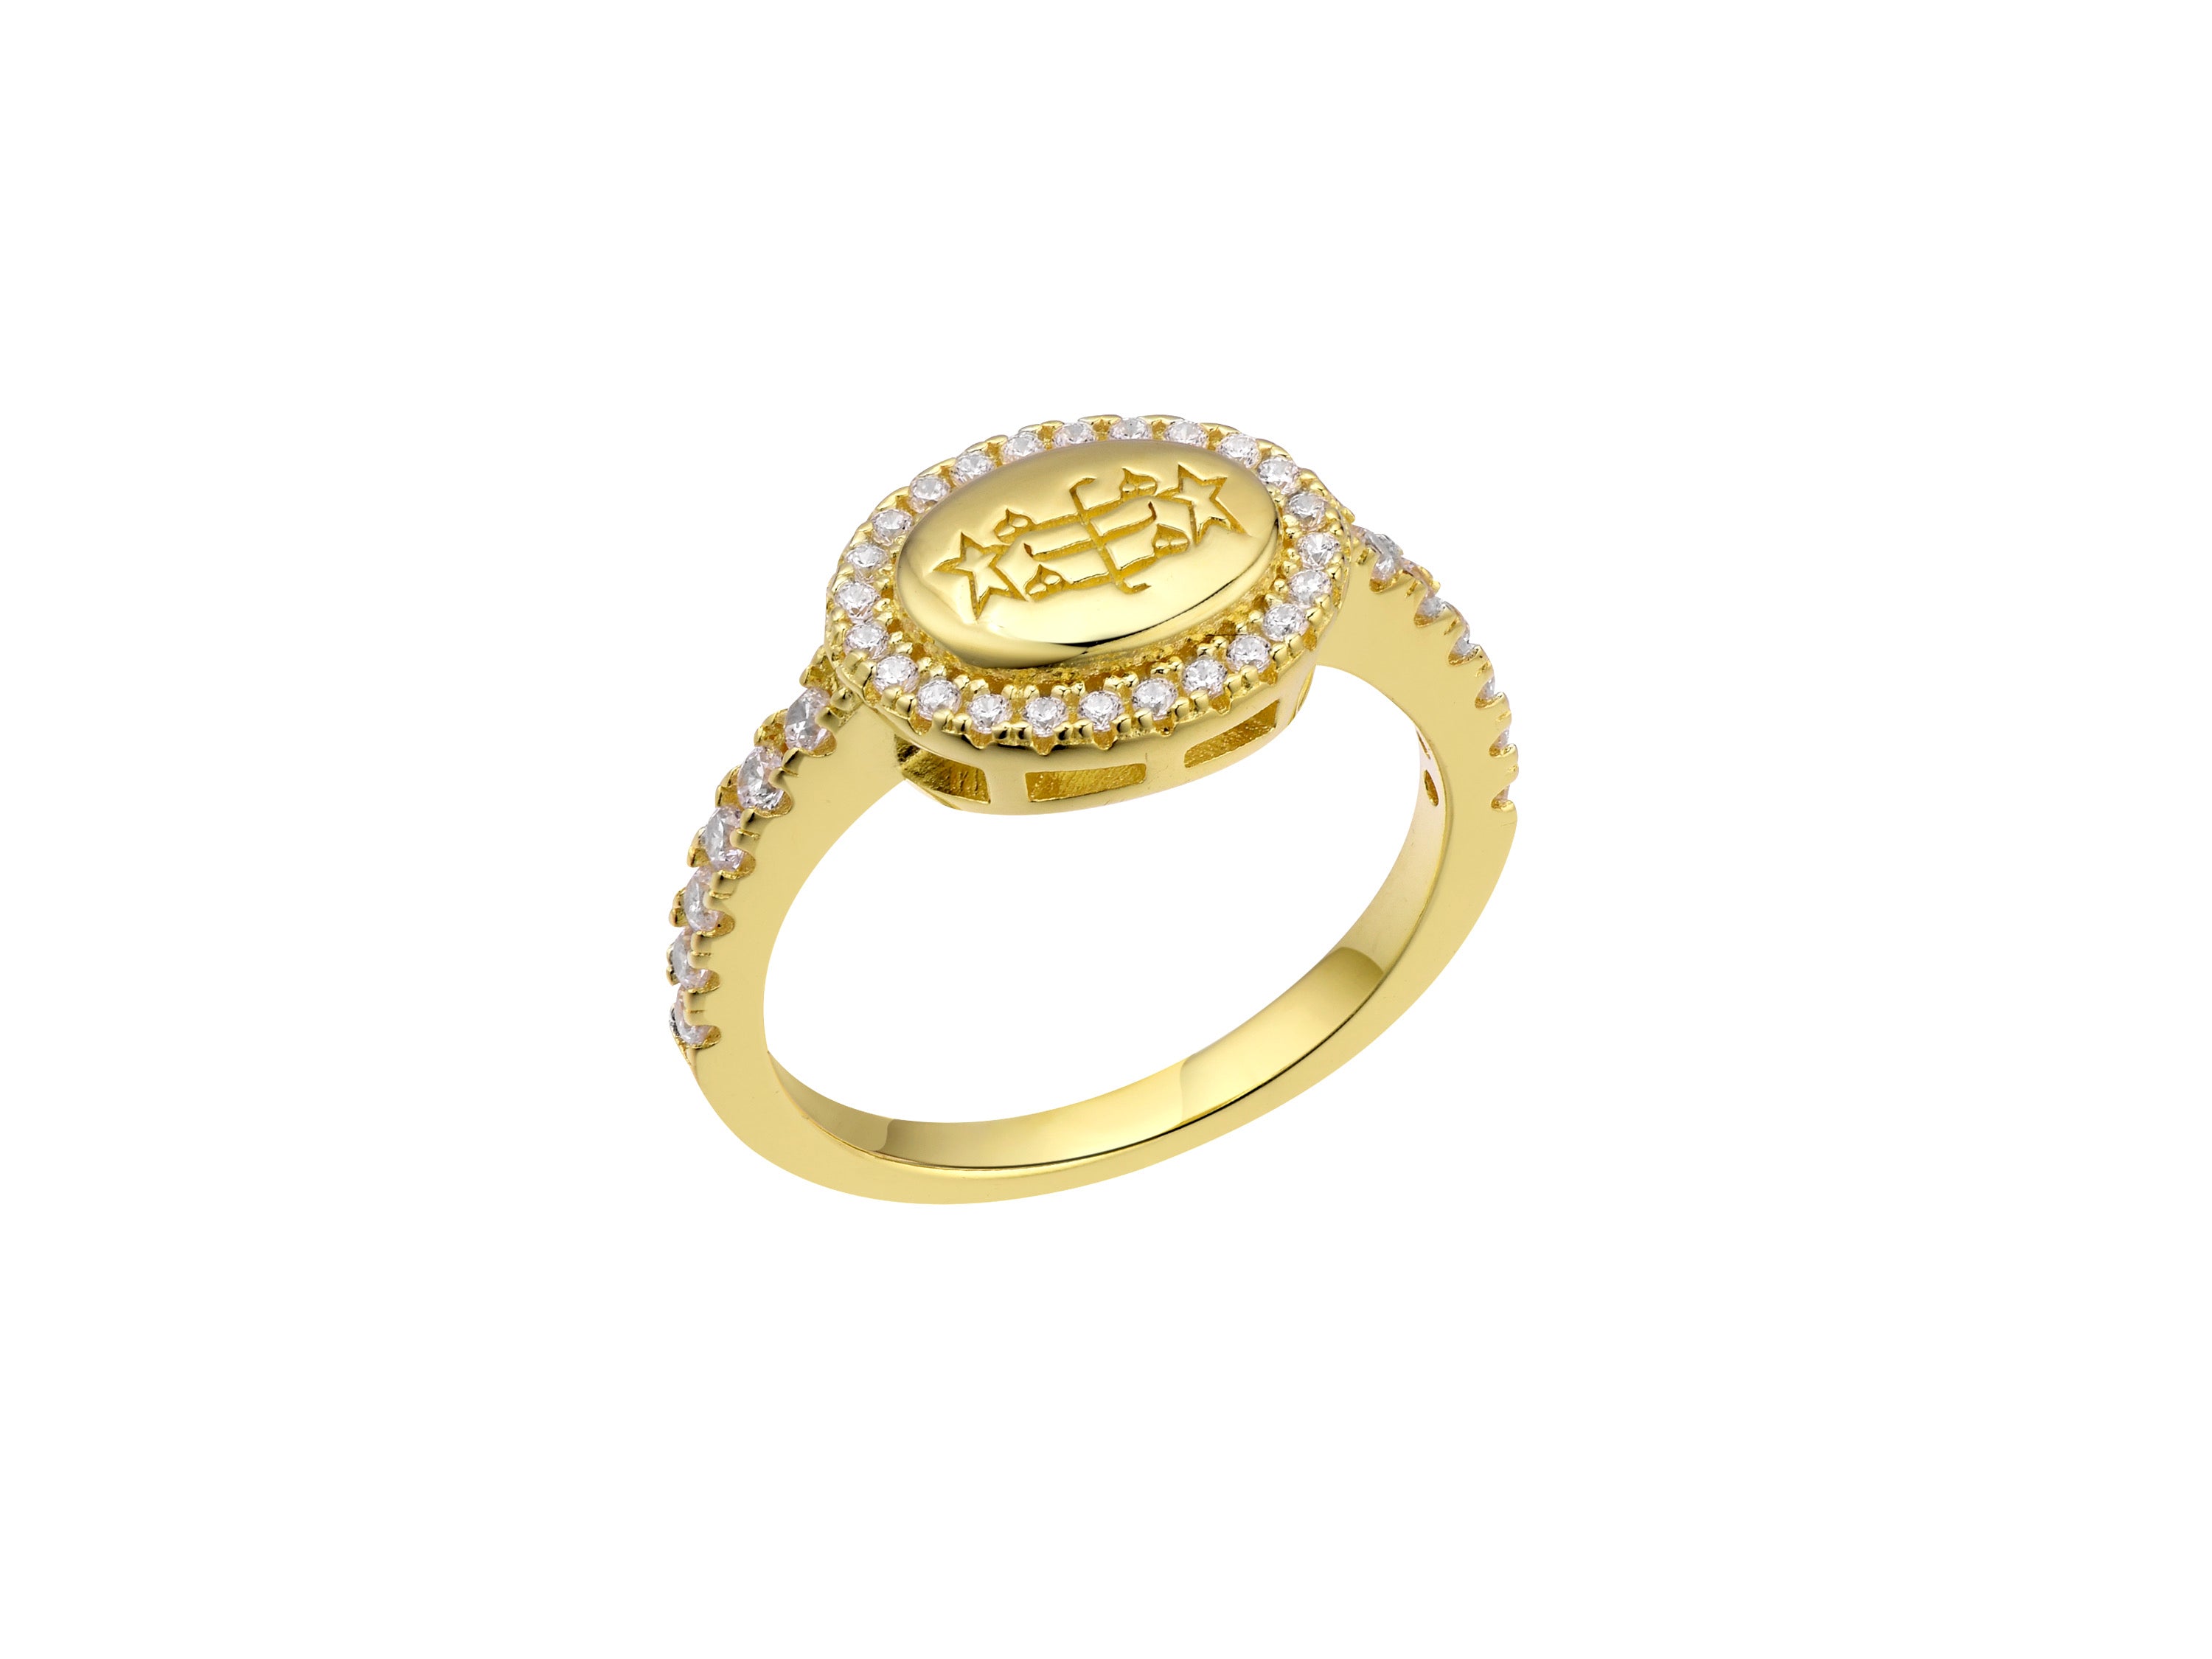 gold bahai ringstone symbol engraved on a horizontal oval signet ring with a halo of micropave round diamonds